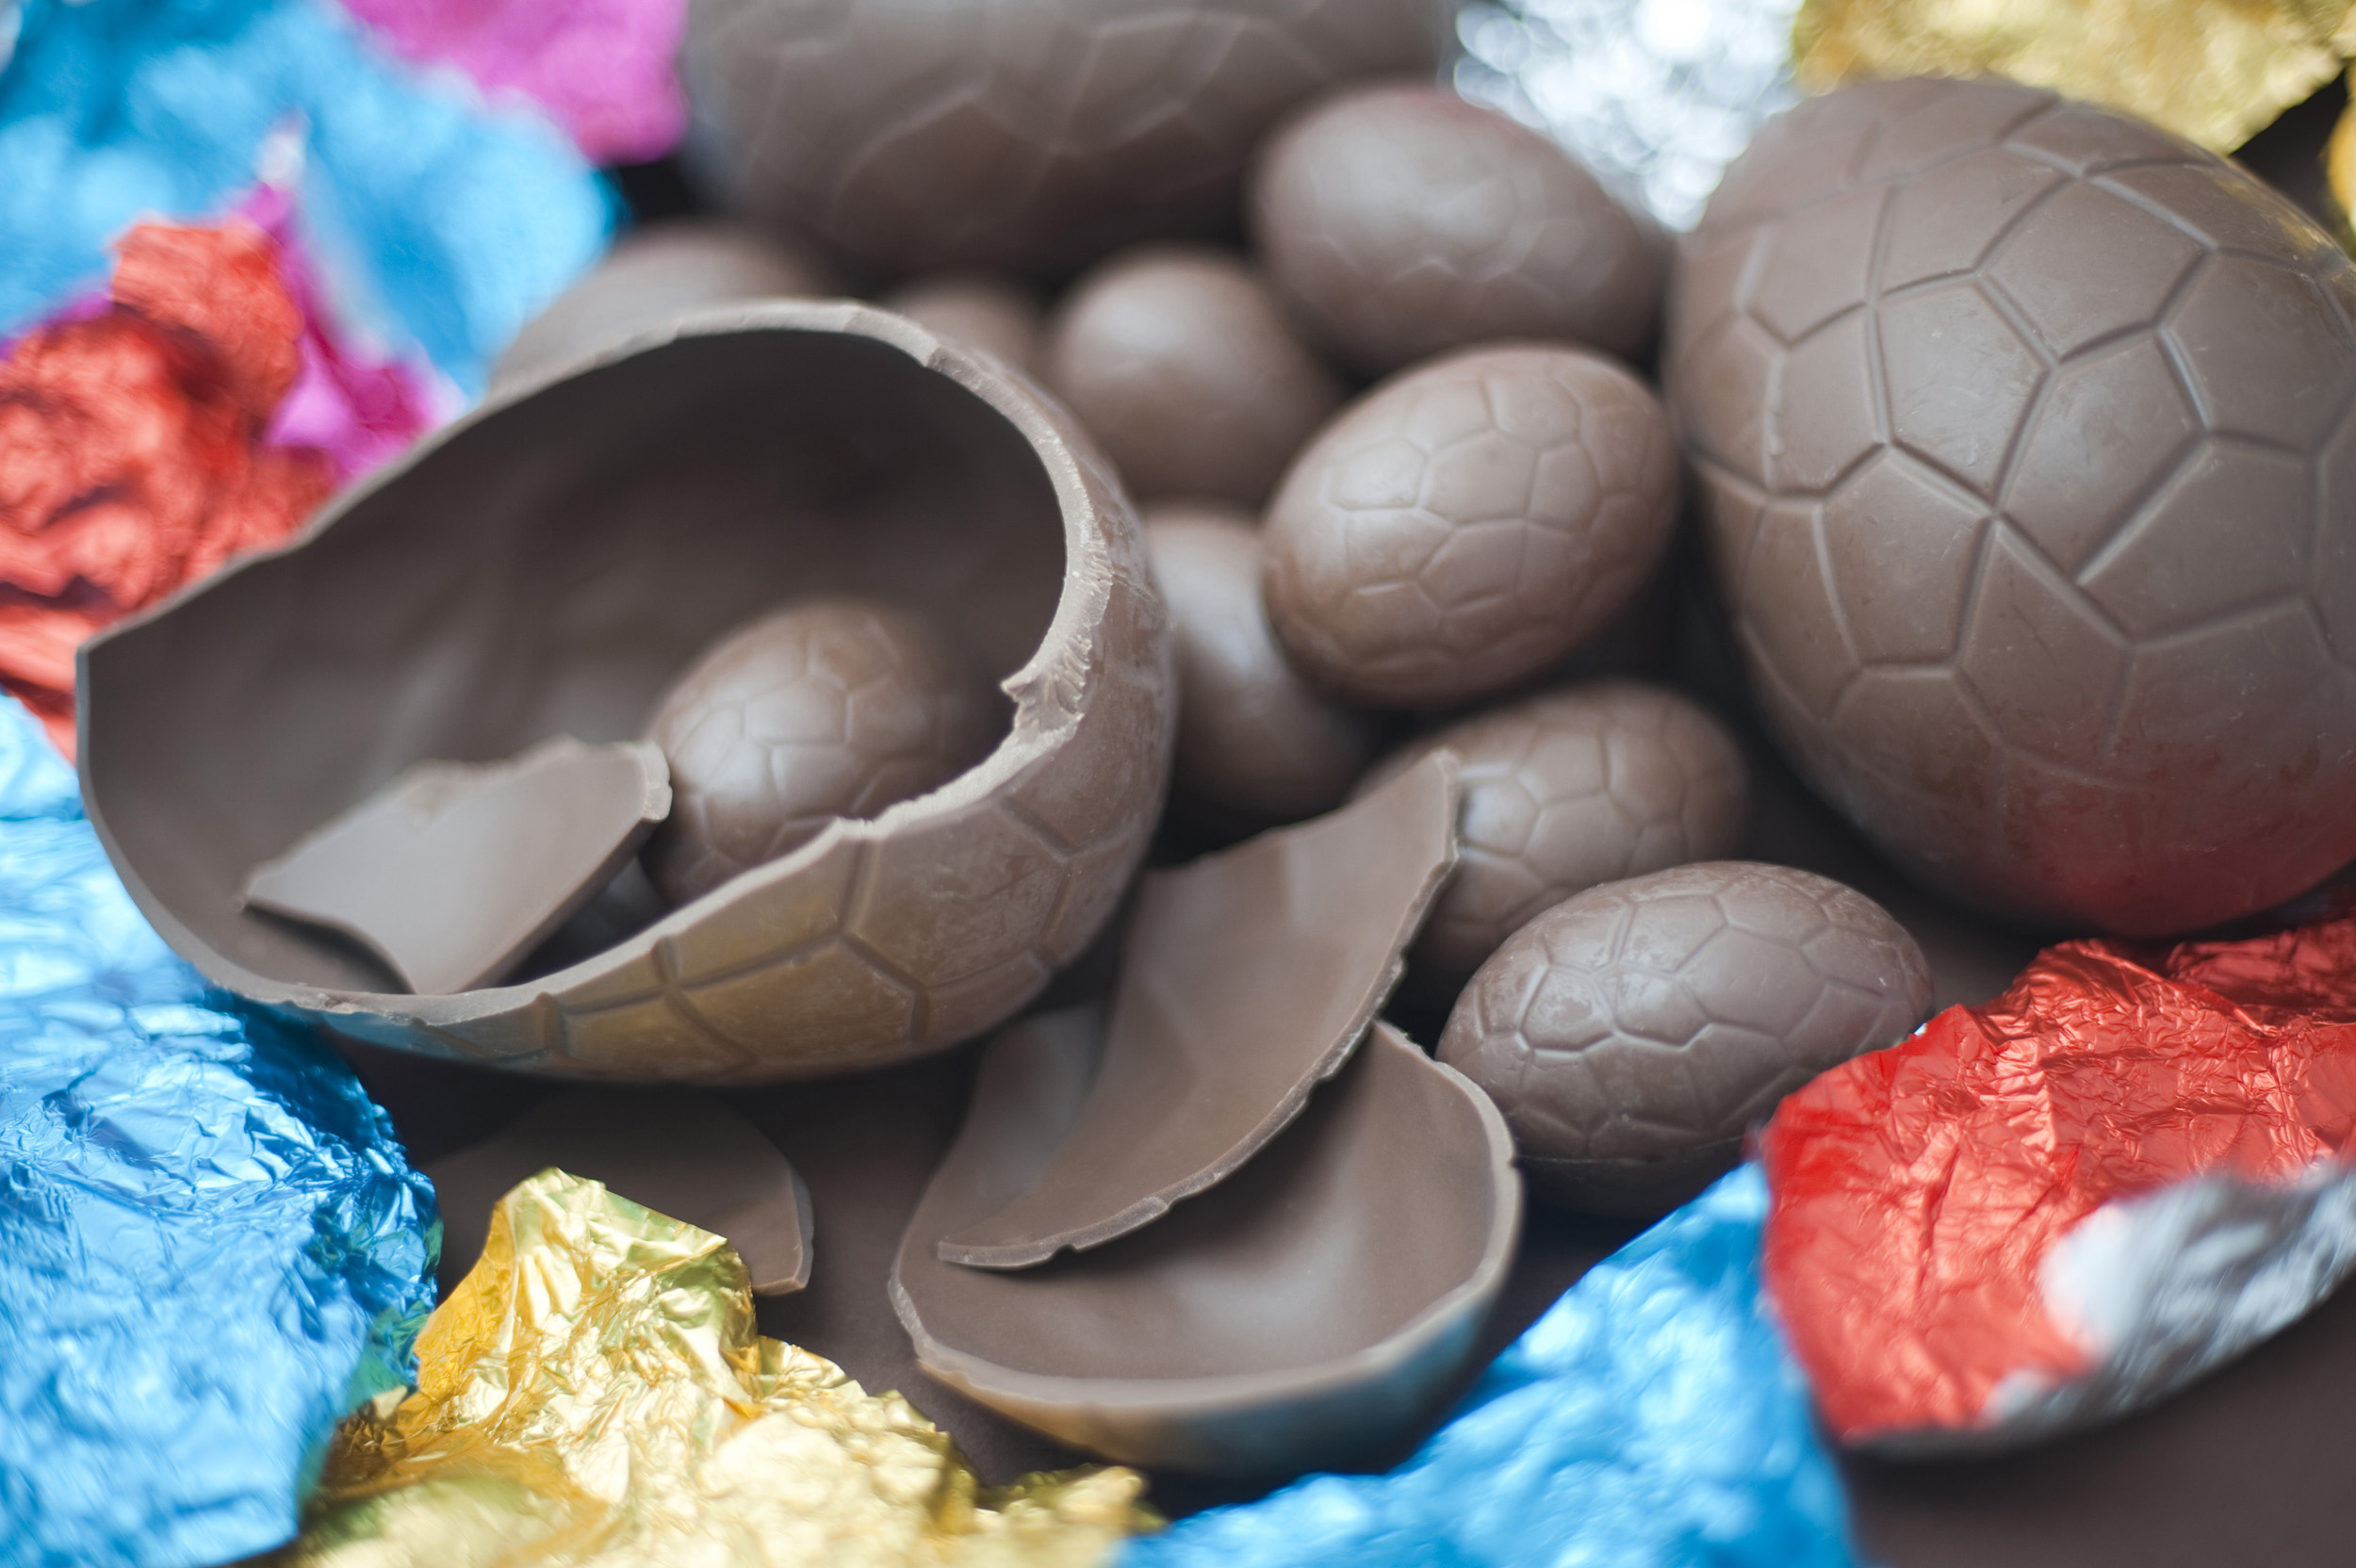 Assortment of unwrapped chocolate Easter eggs Creative Commons Stock Image